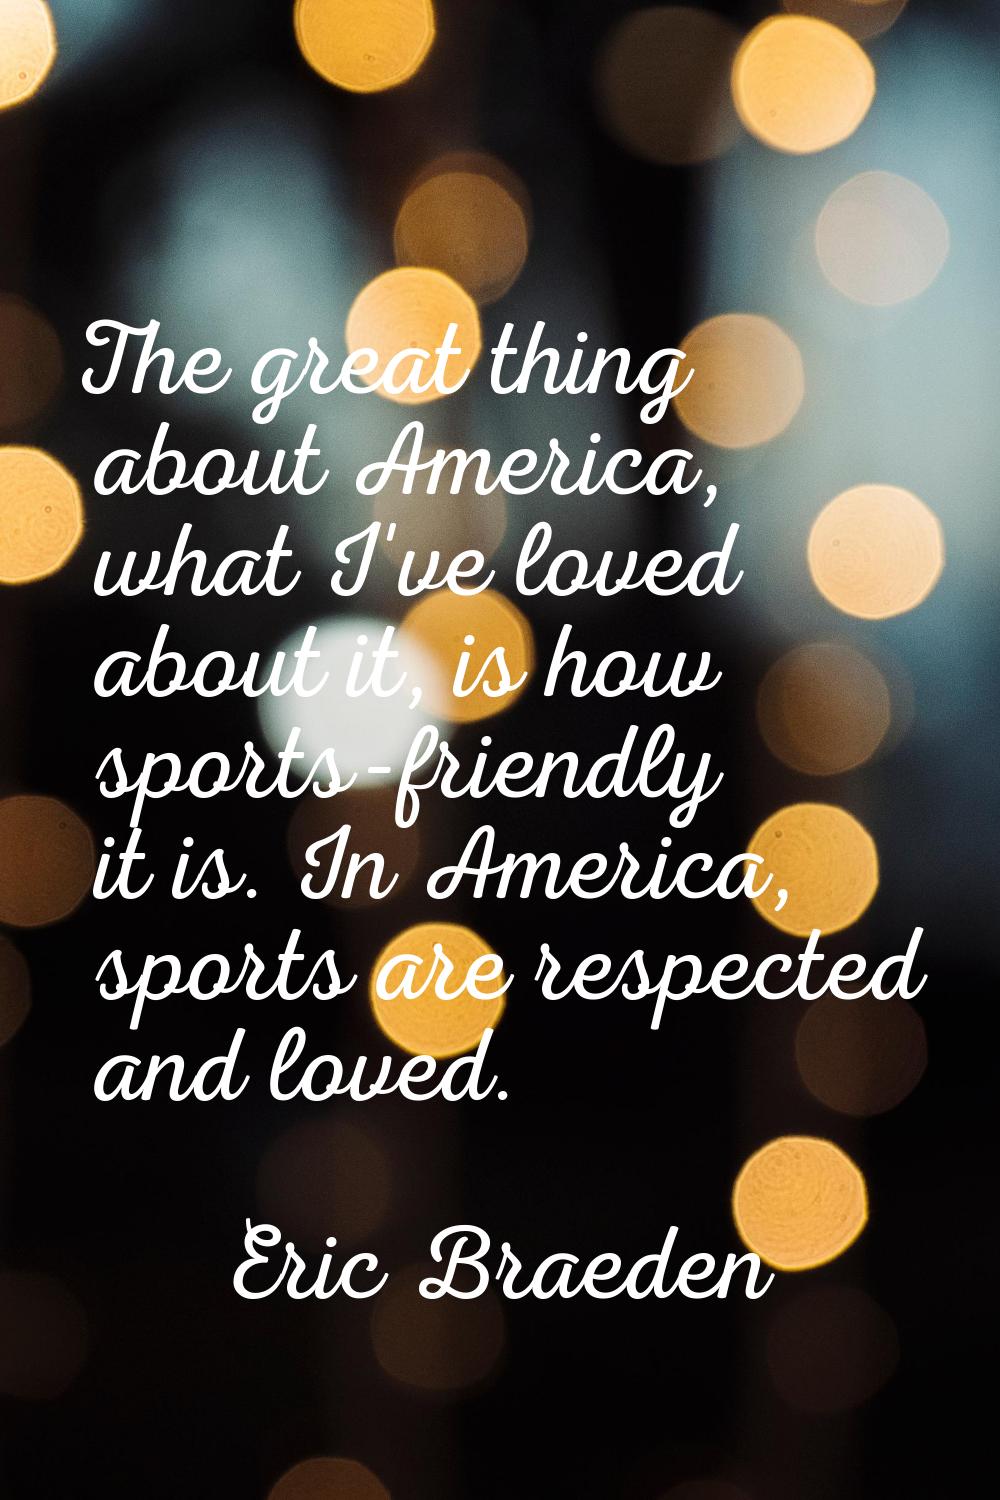 The great thing about America, what I've loved about it, is how sports-friendly it is. In America, 